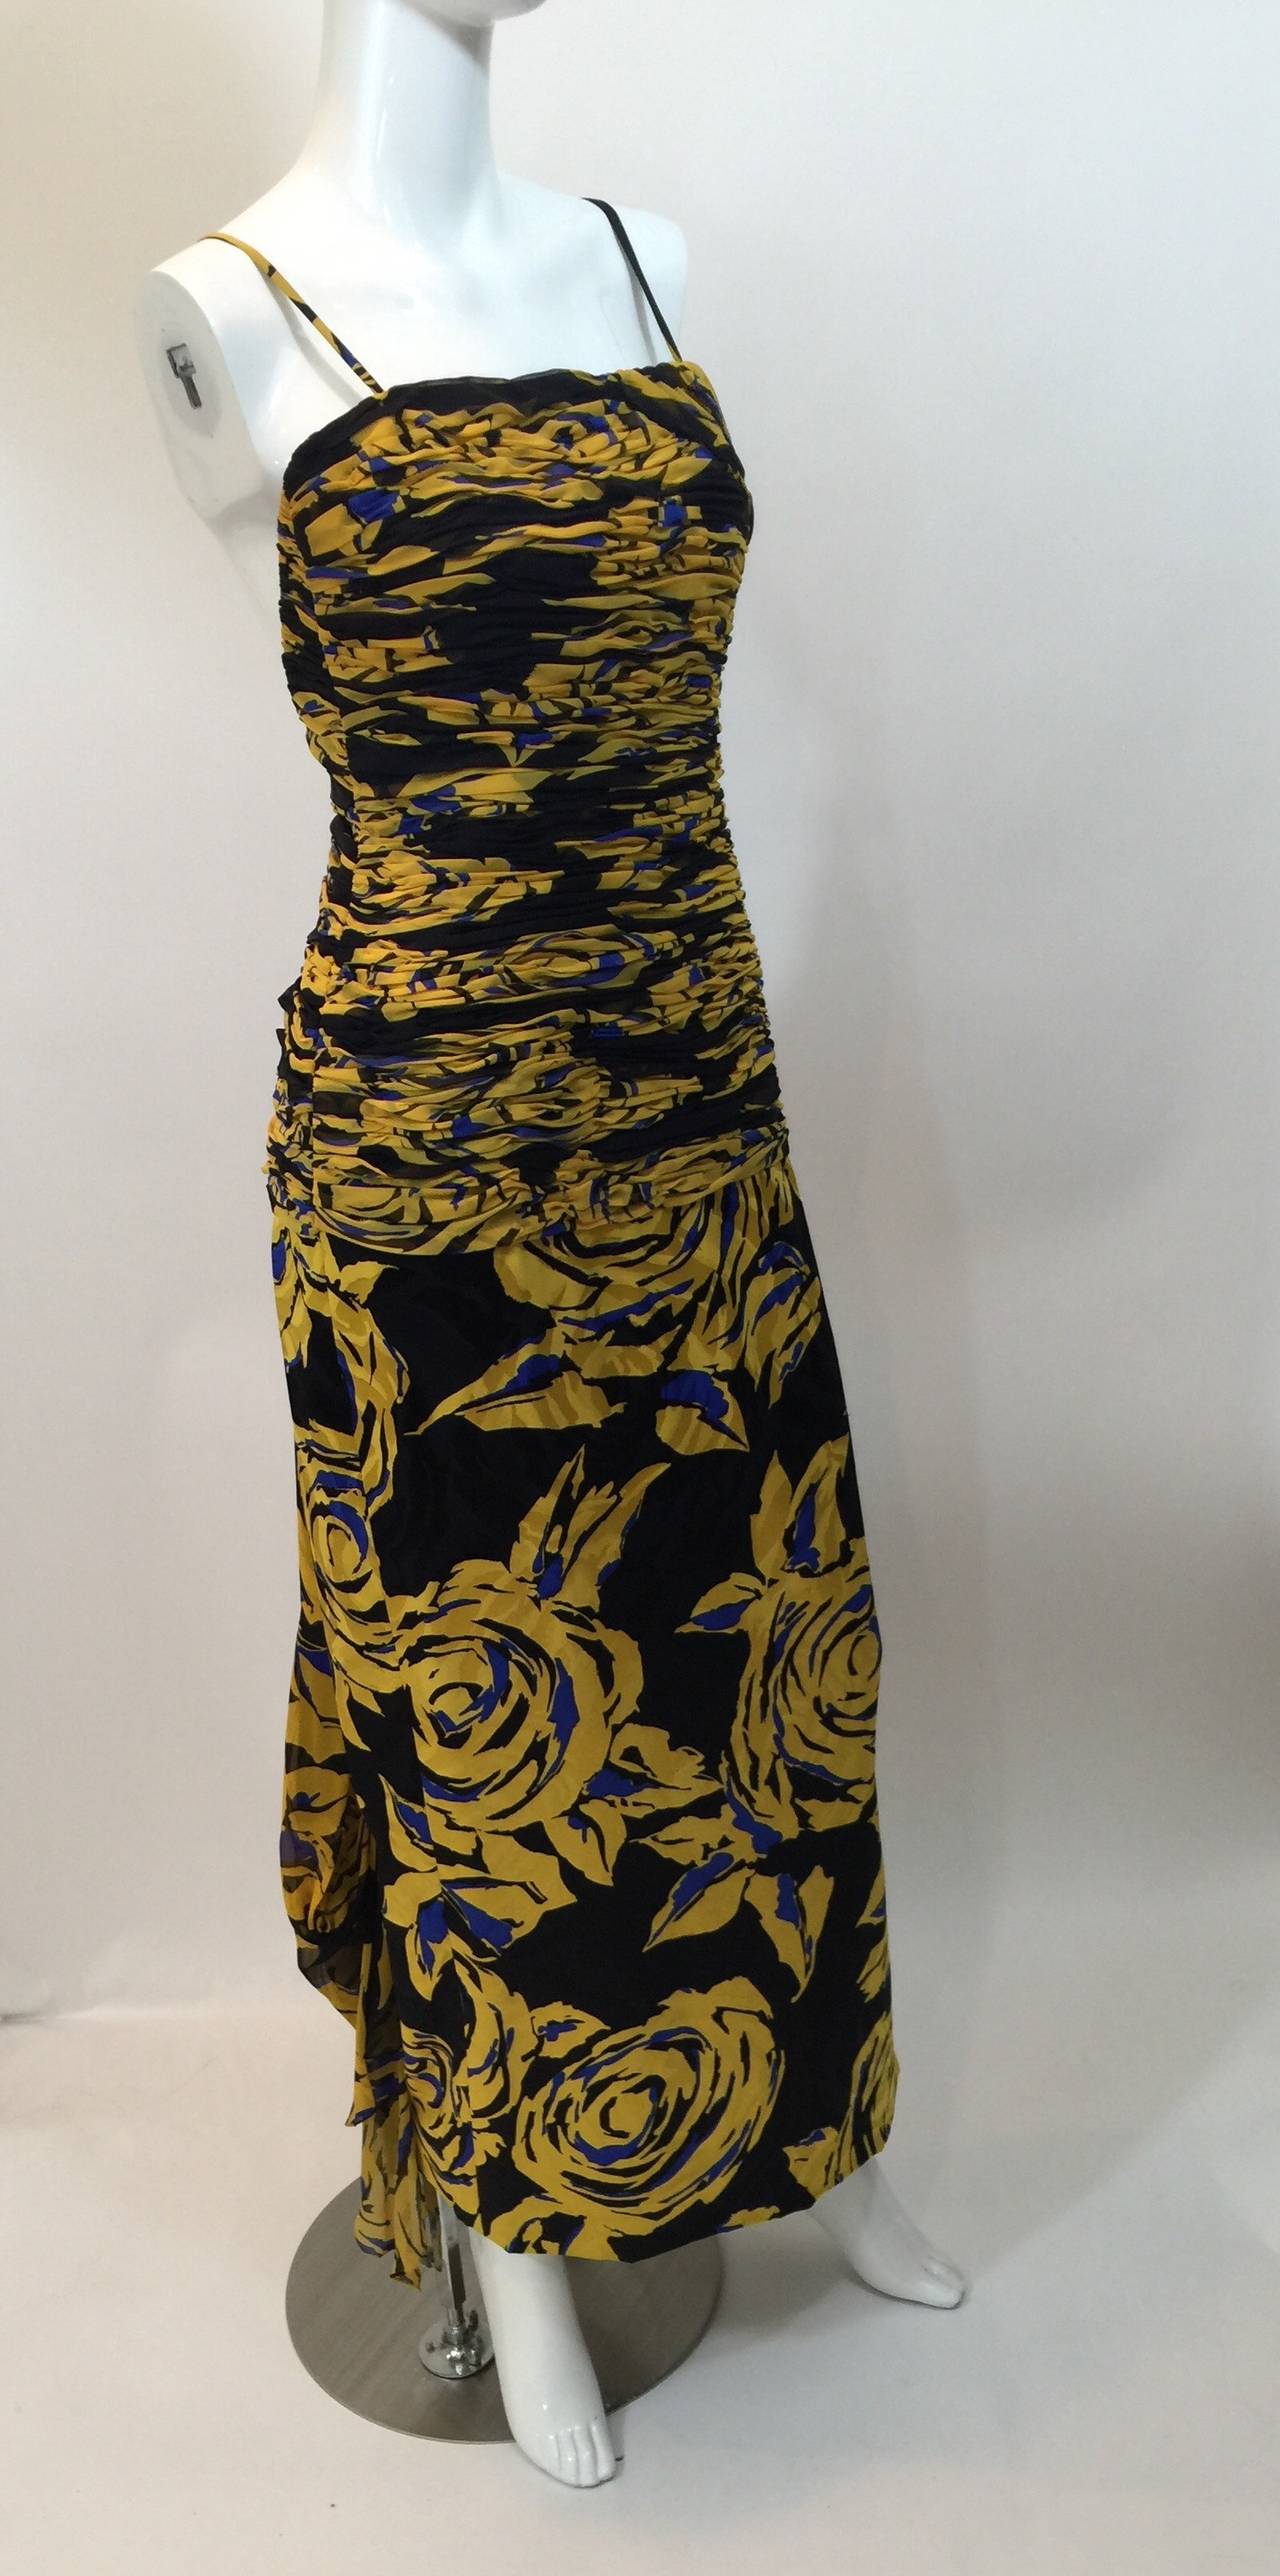 Incredible 1980s Valentino Silk Floral Bustle Dress For Sale at 1stdibs